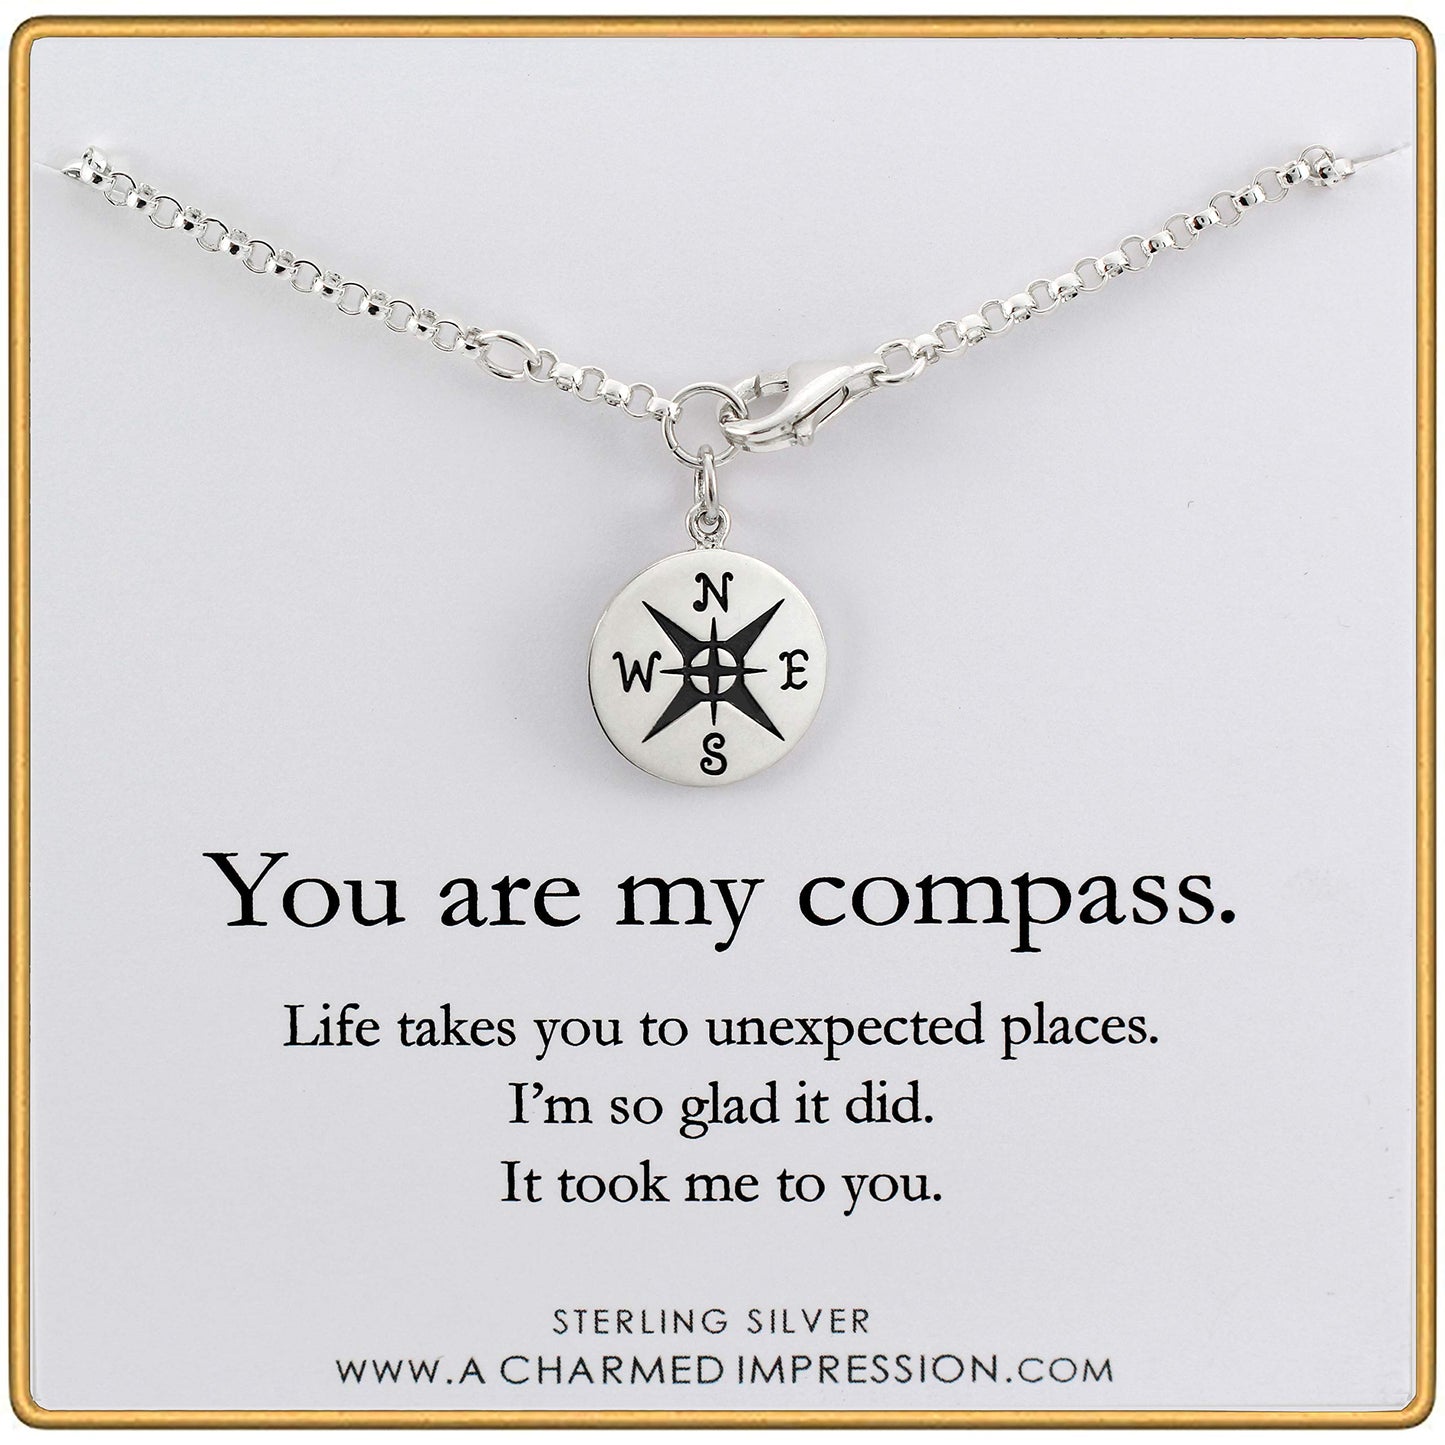 You are My Compass • I'd be Lost Without You • Intentional Charm Bracelet • Unique Handcrafted Gift for Wife/Girlfriend/Best Friend